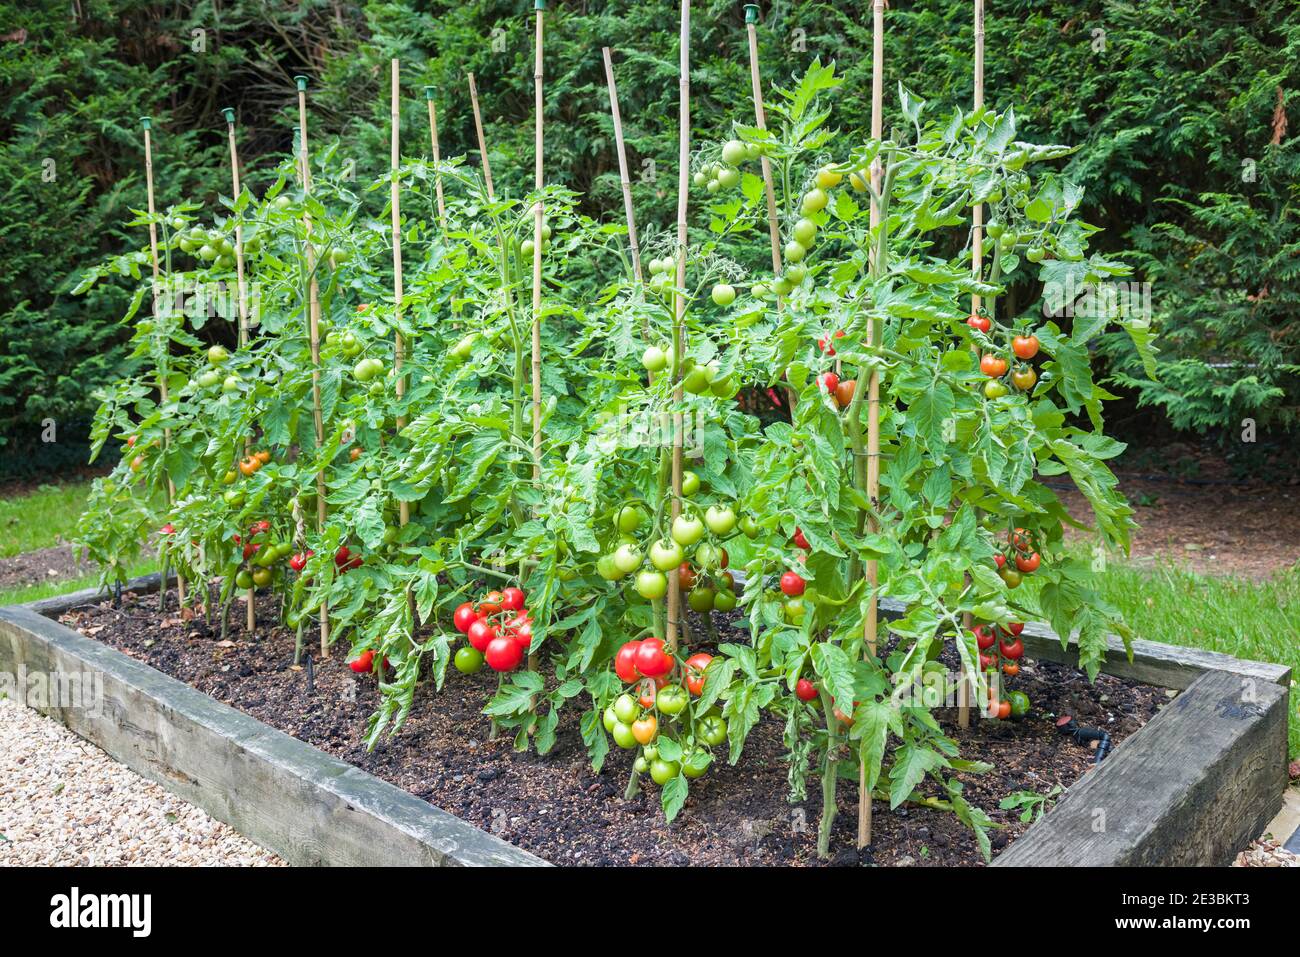 Tomato plants with ripe red tomatoes growing outdoors, outside, in a garden in England, UK Stock Photo